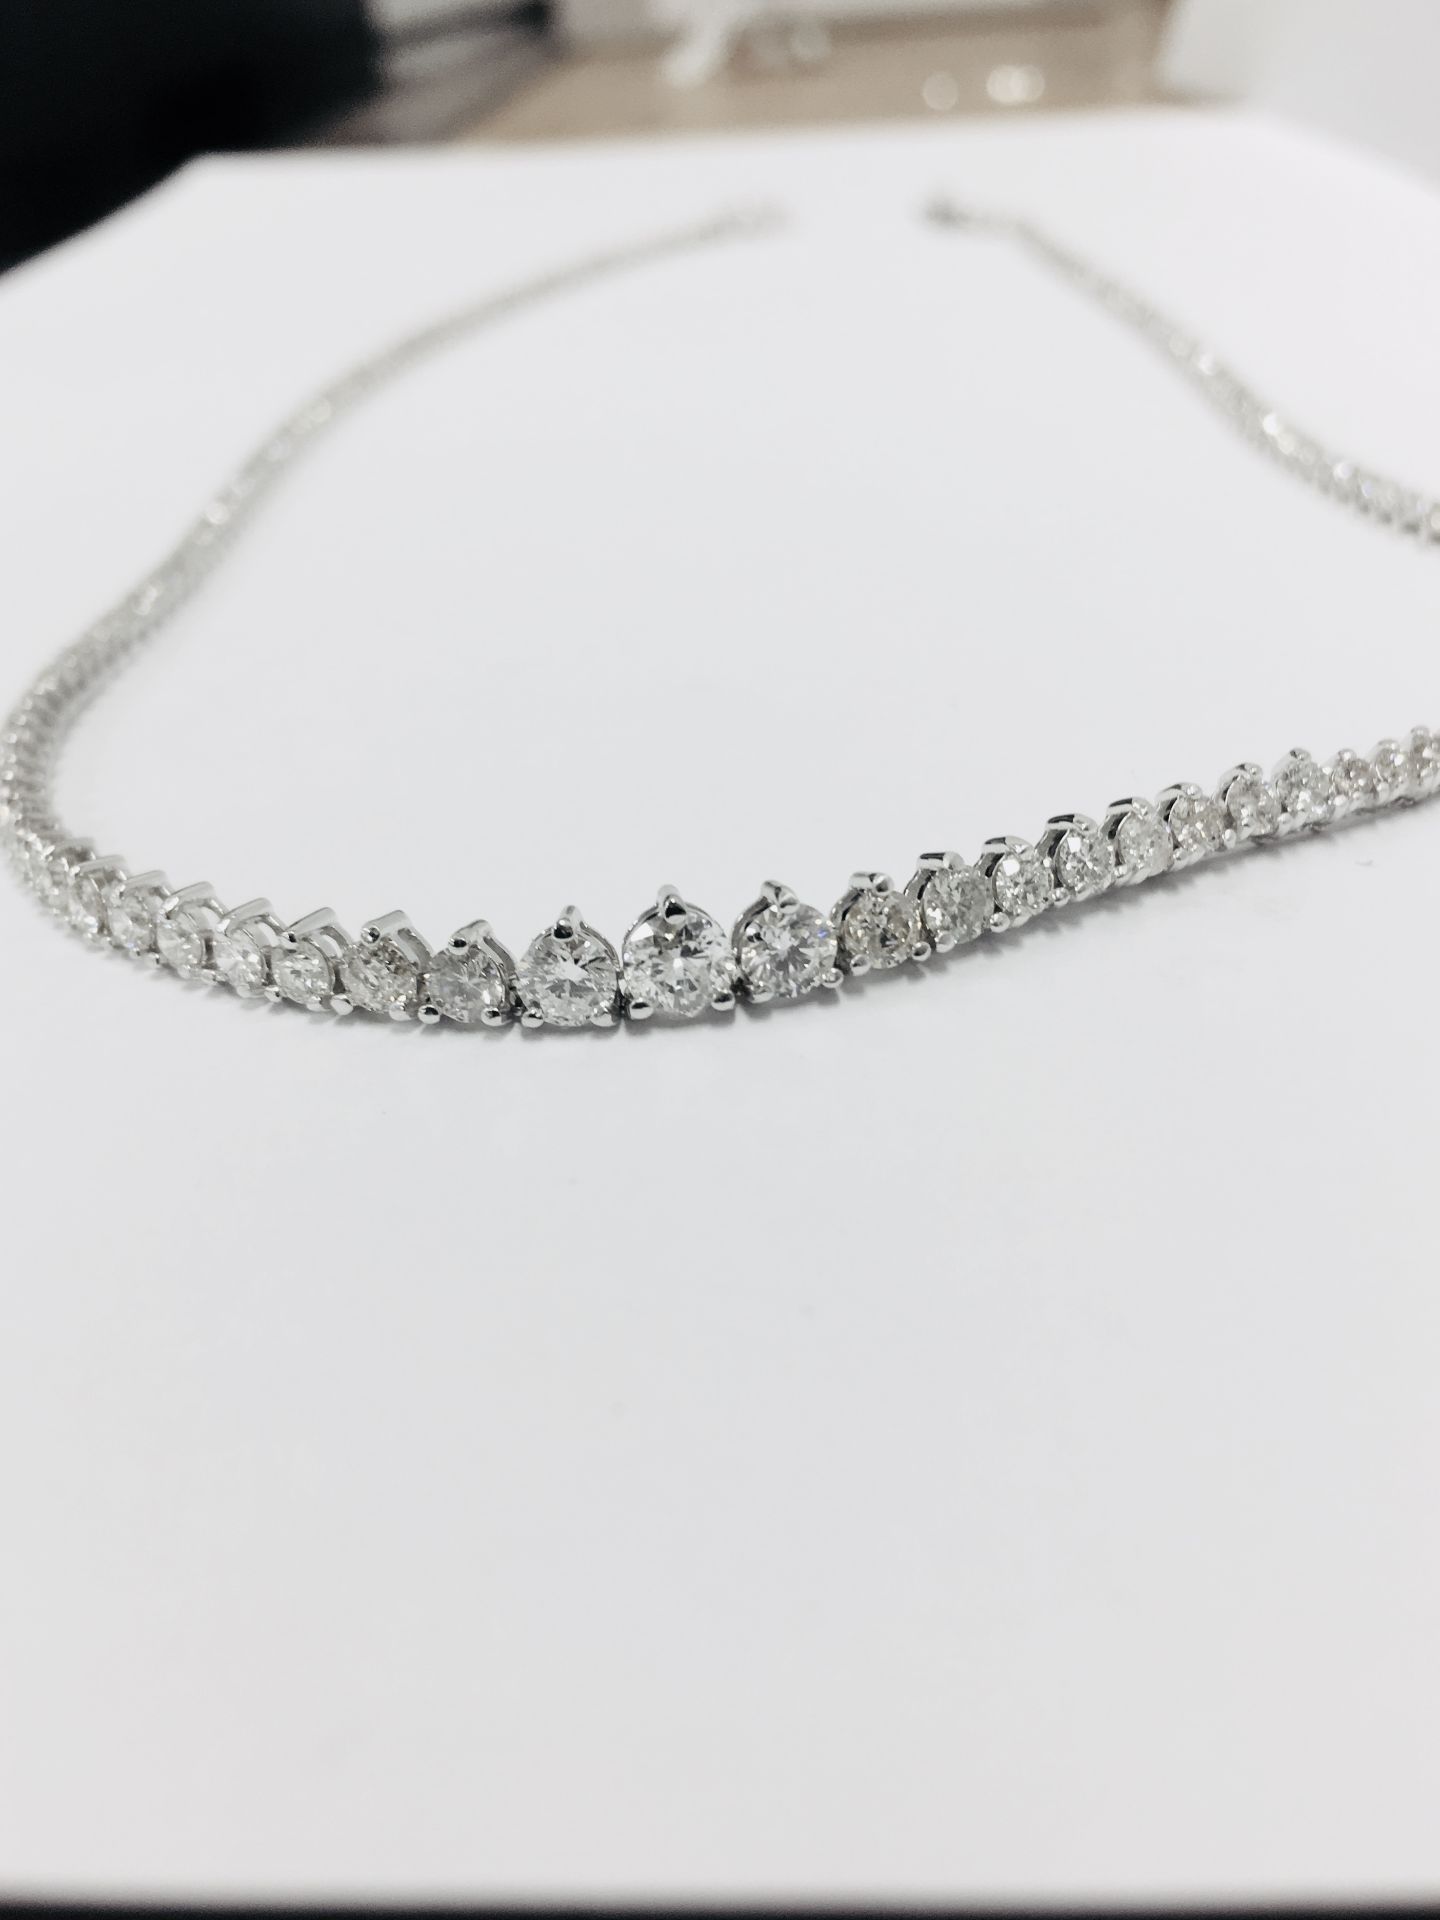 15ct Diamond tennis style necklace. 3 claw setting. Graduated diamonds, I colour, Si2 clarity - Image 4 of 5